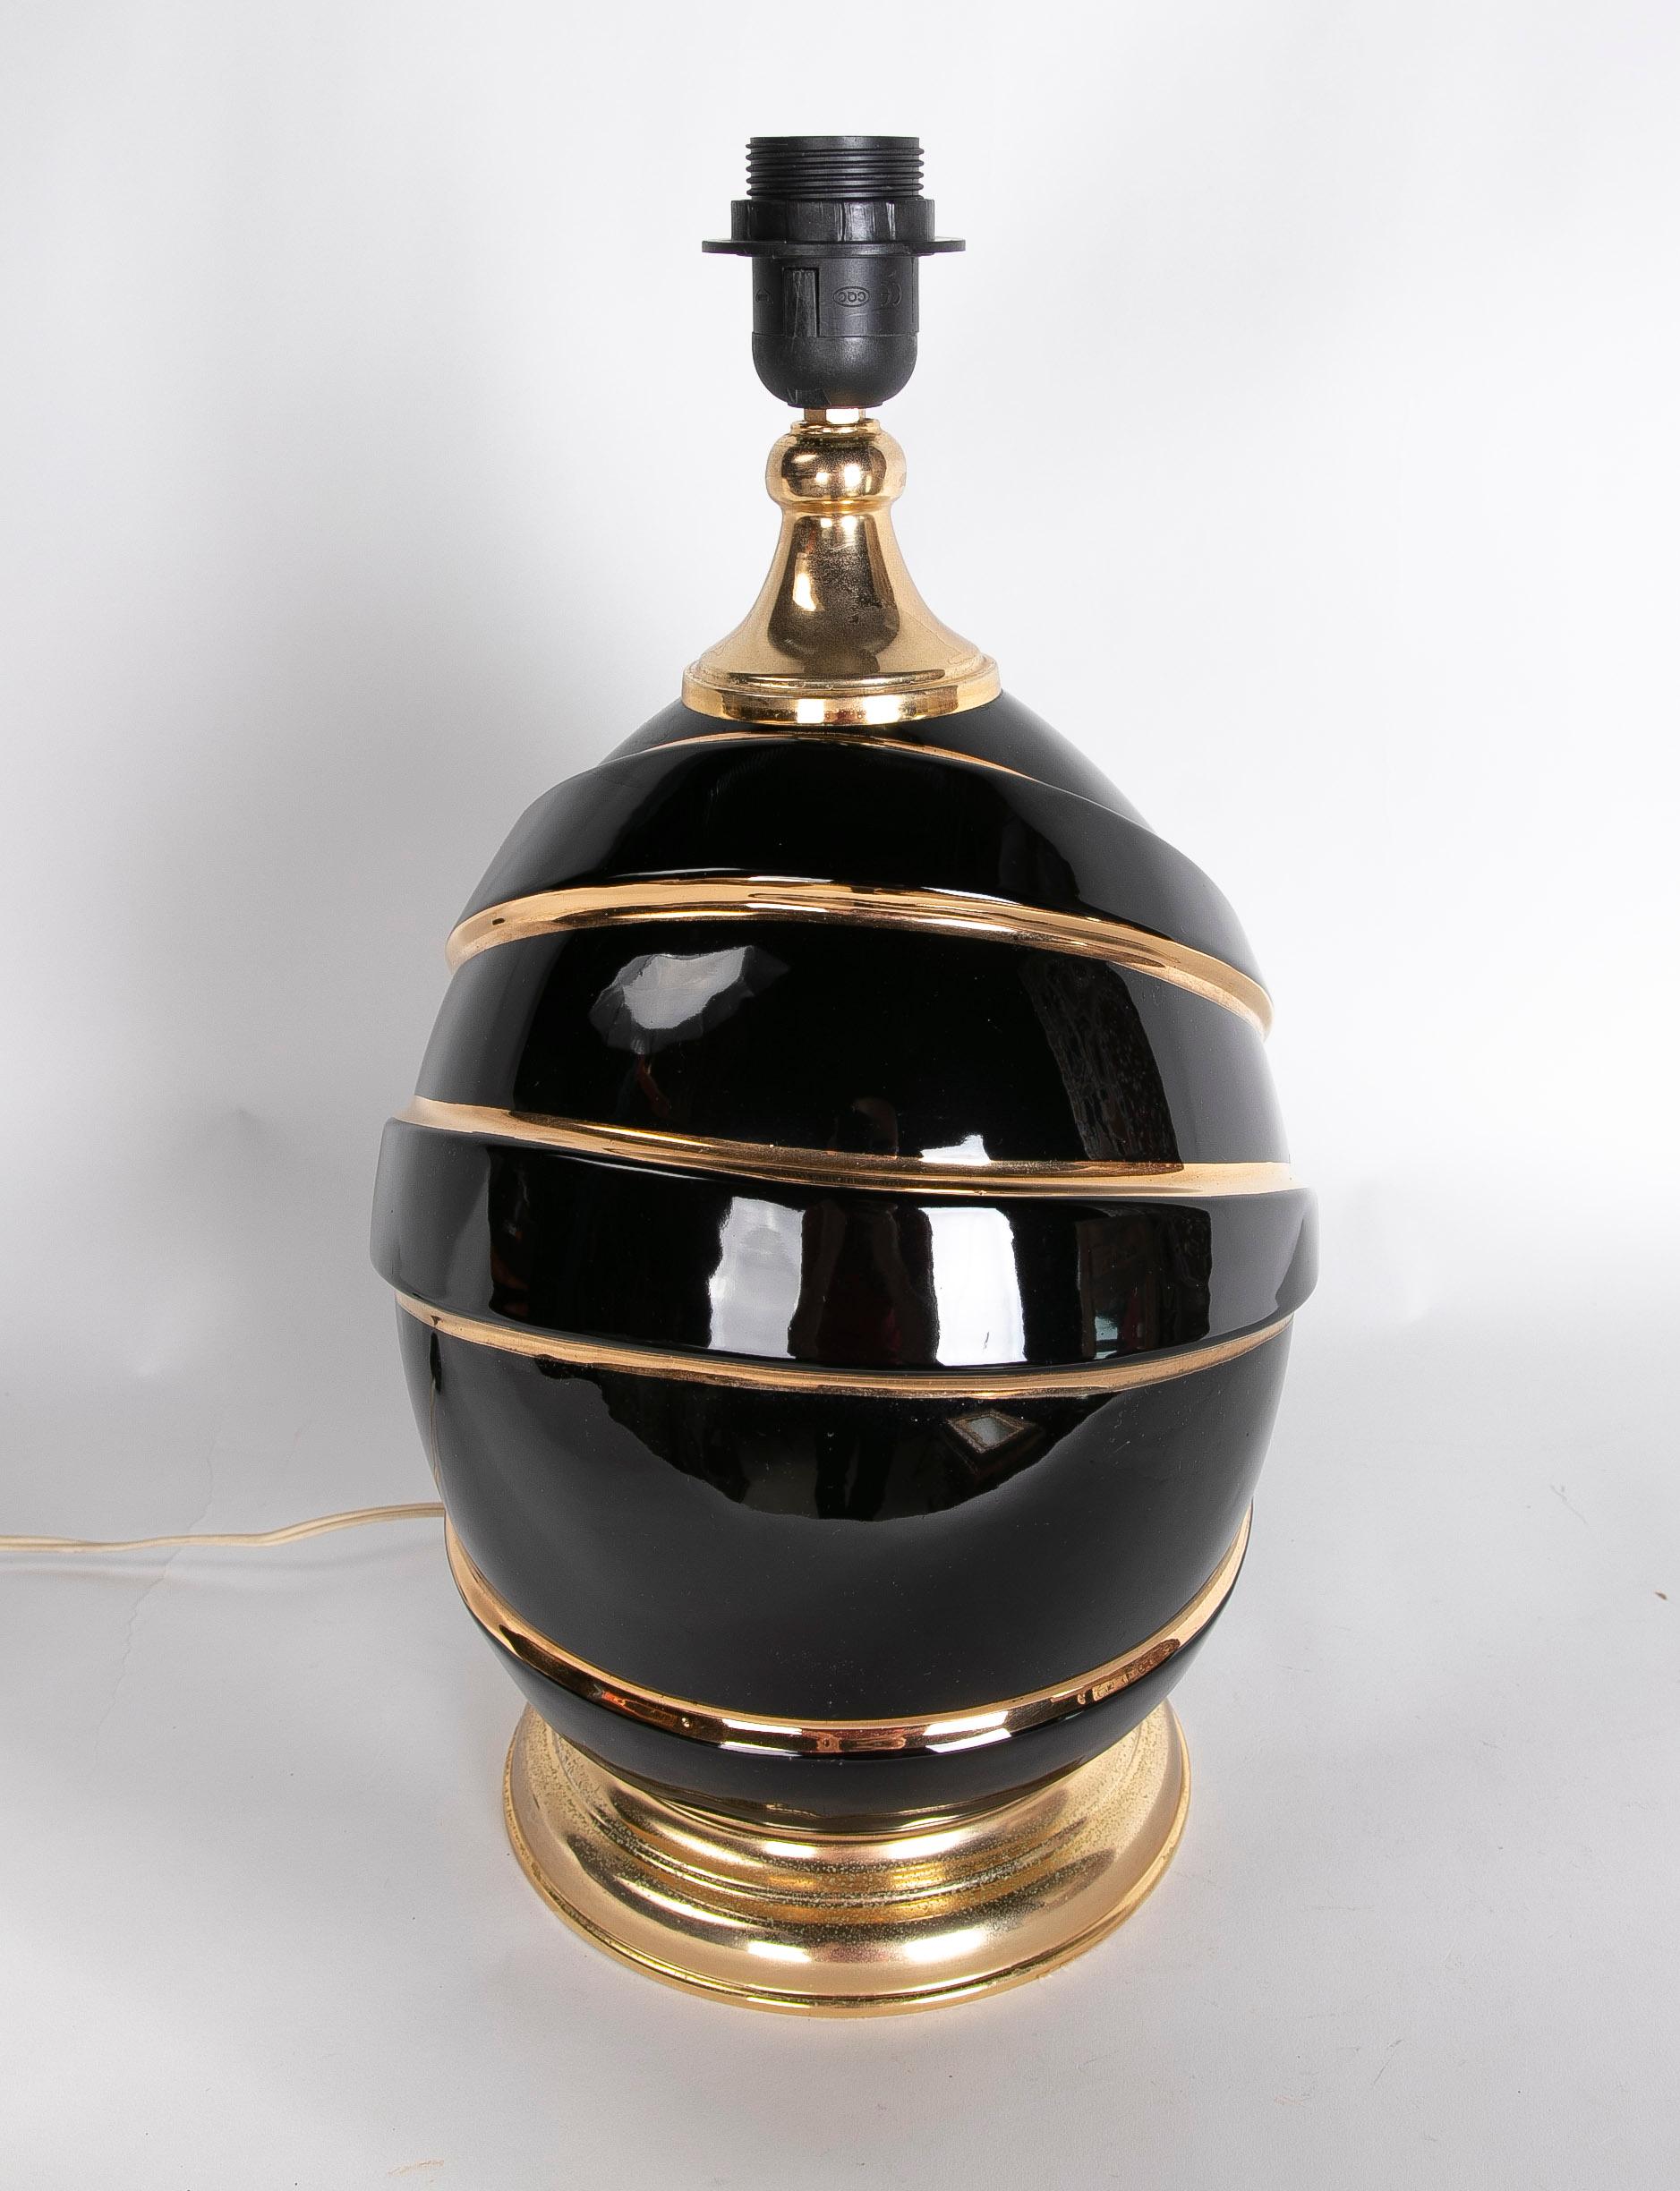 Italian ceramic table lamp in Black Colour with Gold Decorations.